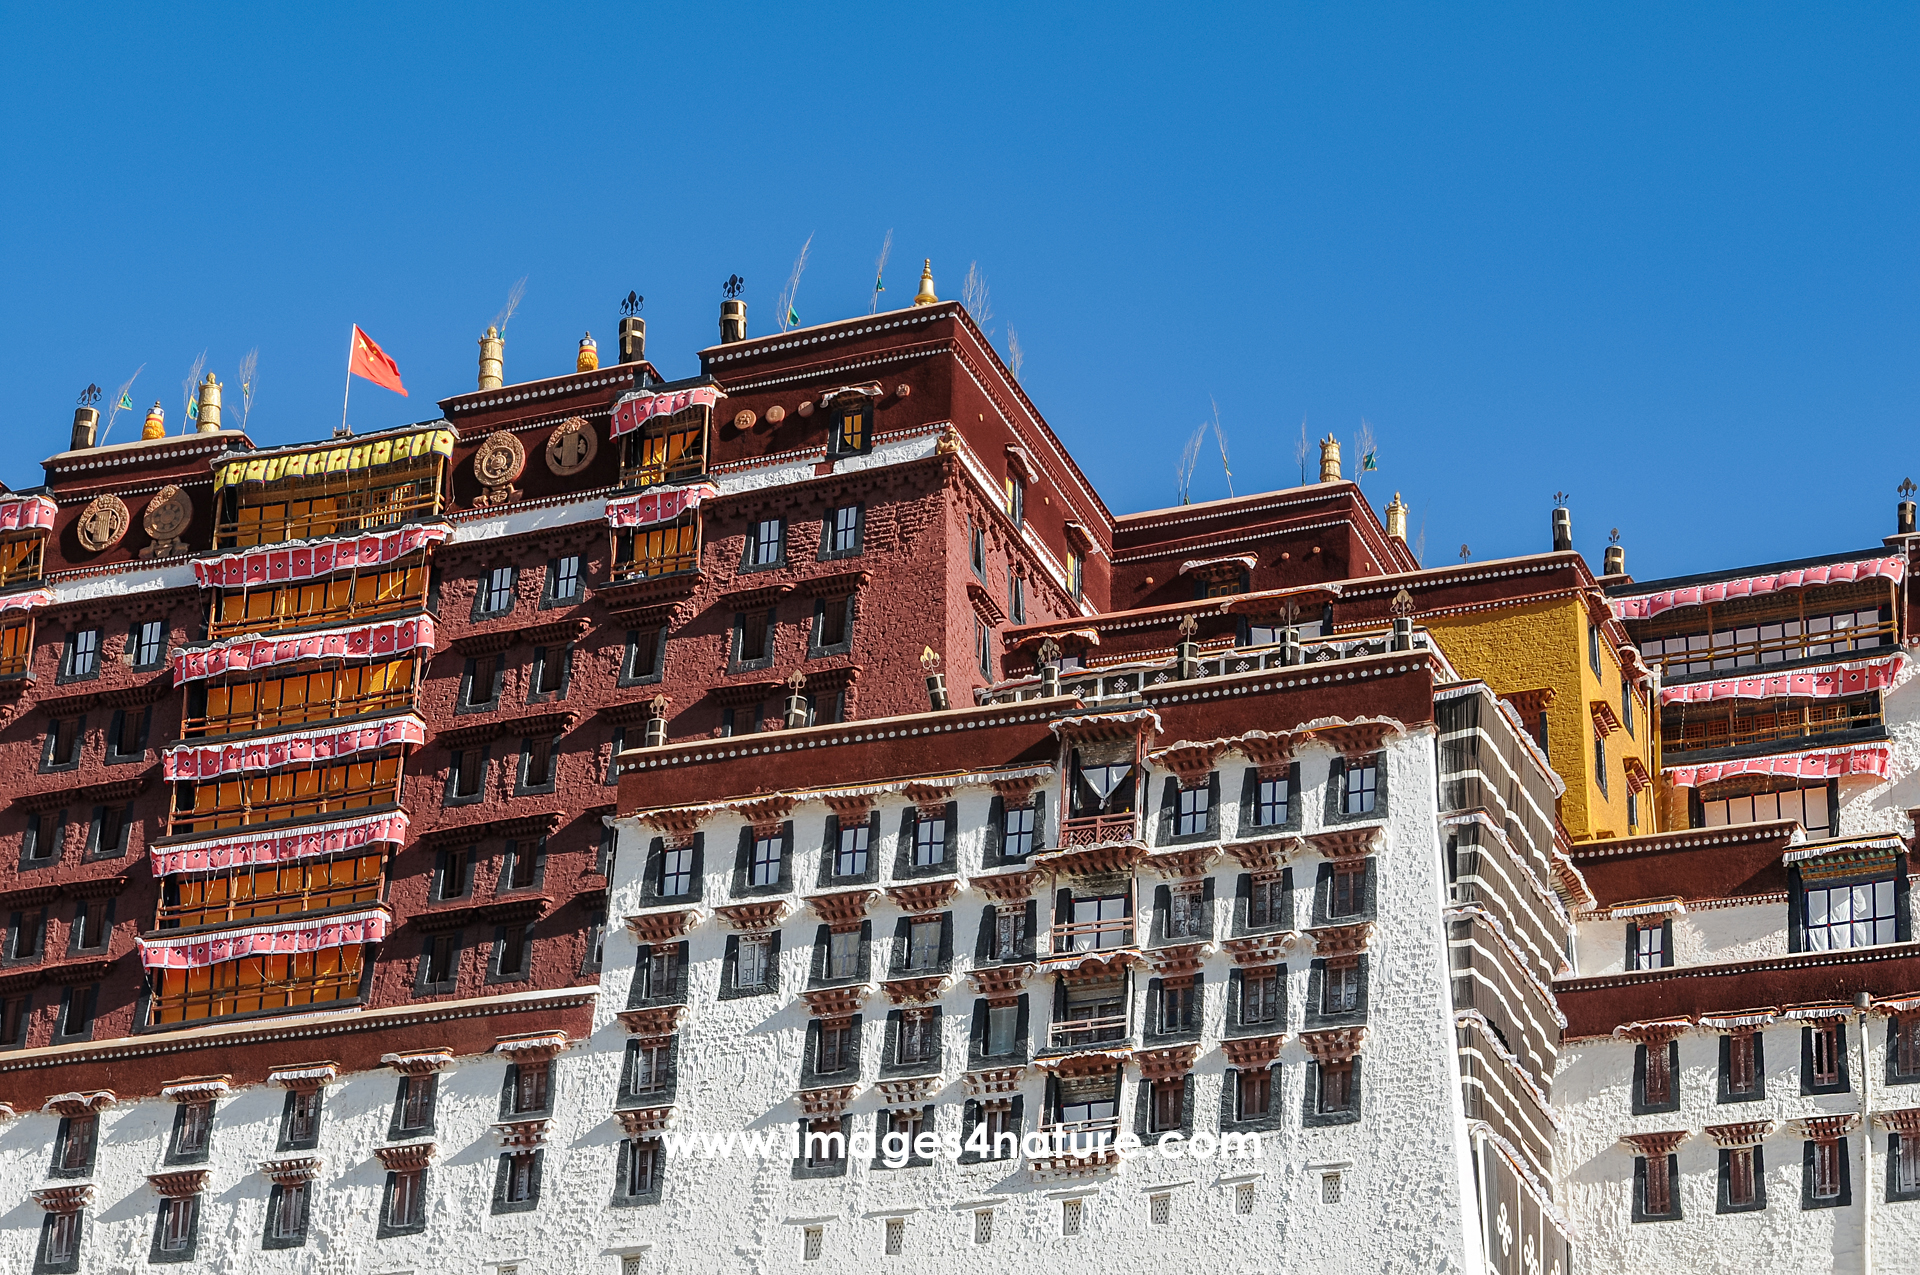 Partial view of the Potala Palace in Lhasa from low angle against blue sky